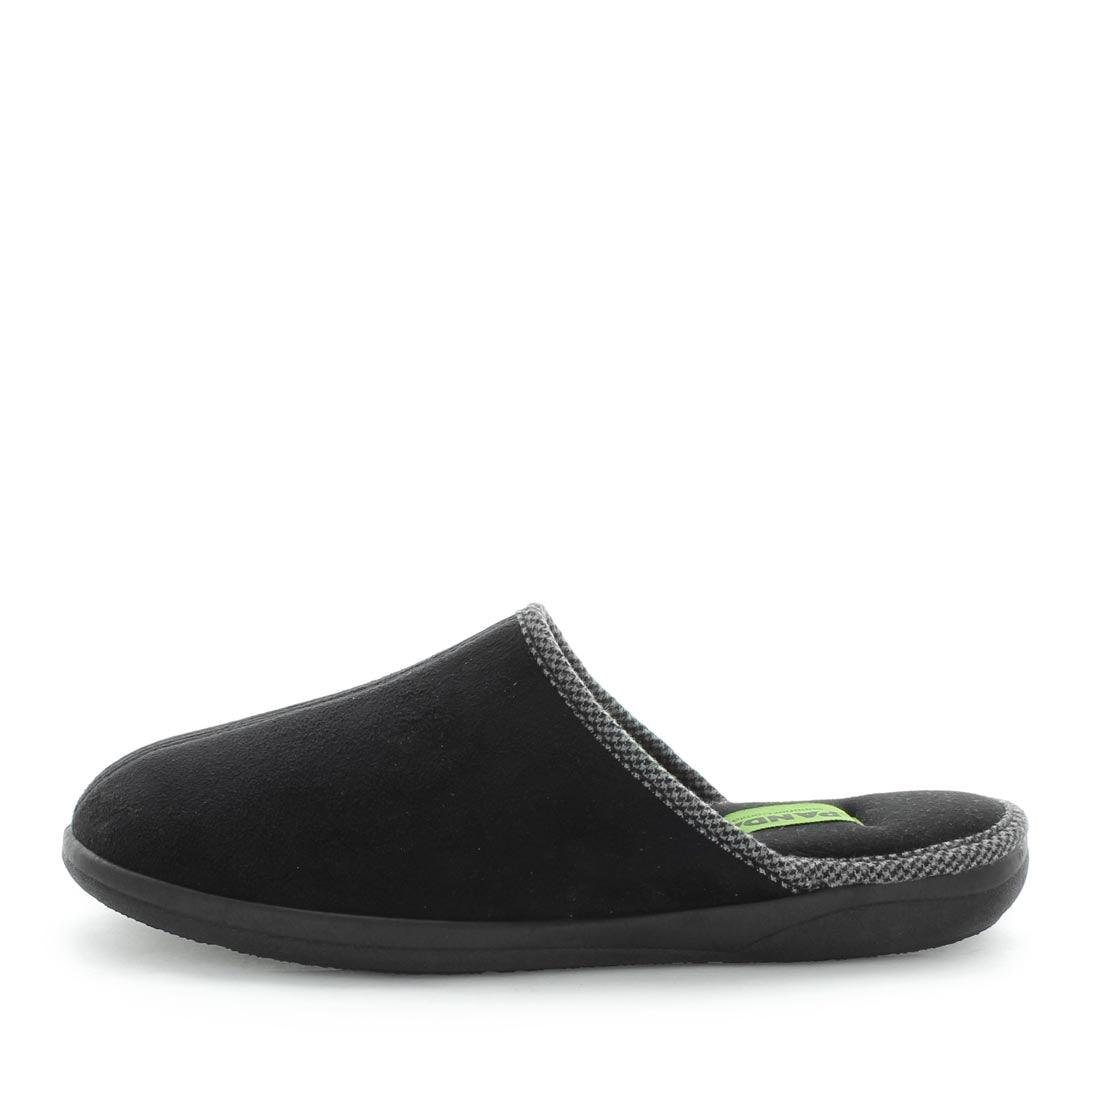 ELROY by PANDA - iShoes - Men's Shoes, Men's Shoes: Slippers, NEW ARRIVALS, What's New - FOOTWEAR-FOOTWEAR